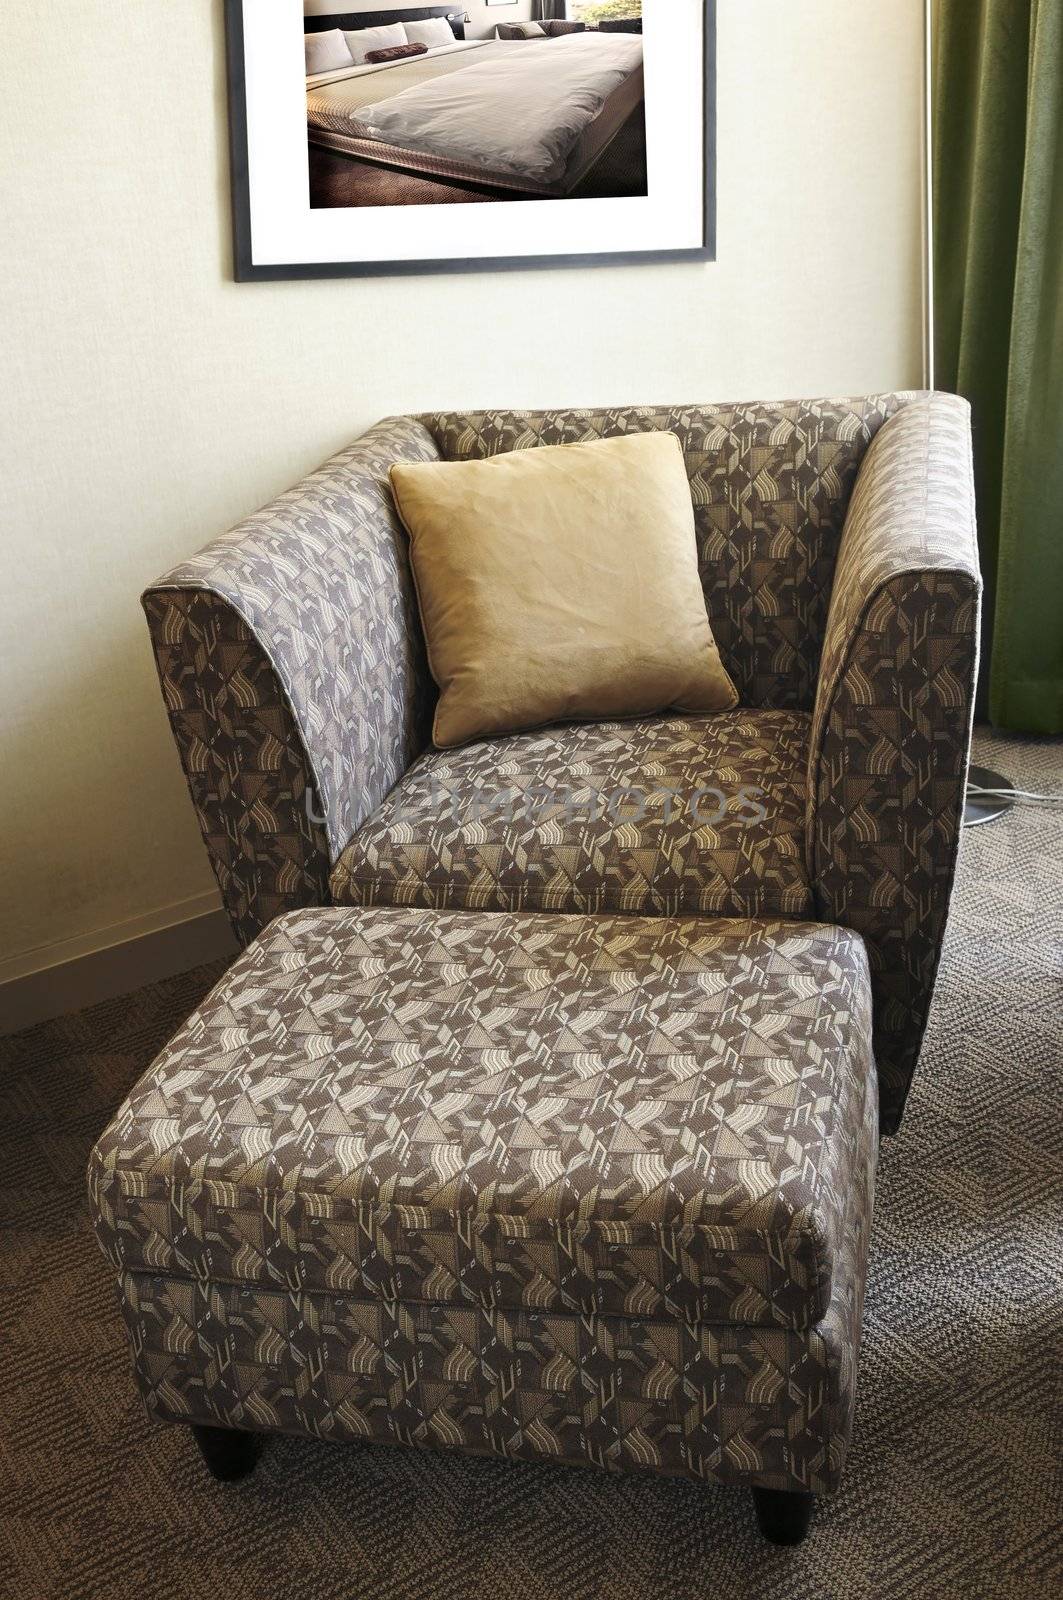 Comfortable armchair with cushion and ottoman. Photo on the wall is my own.